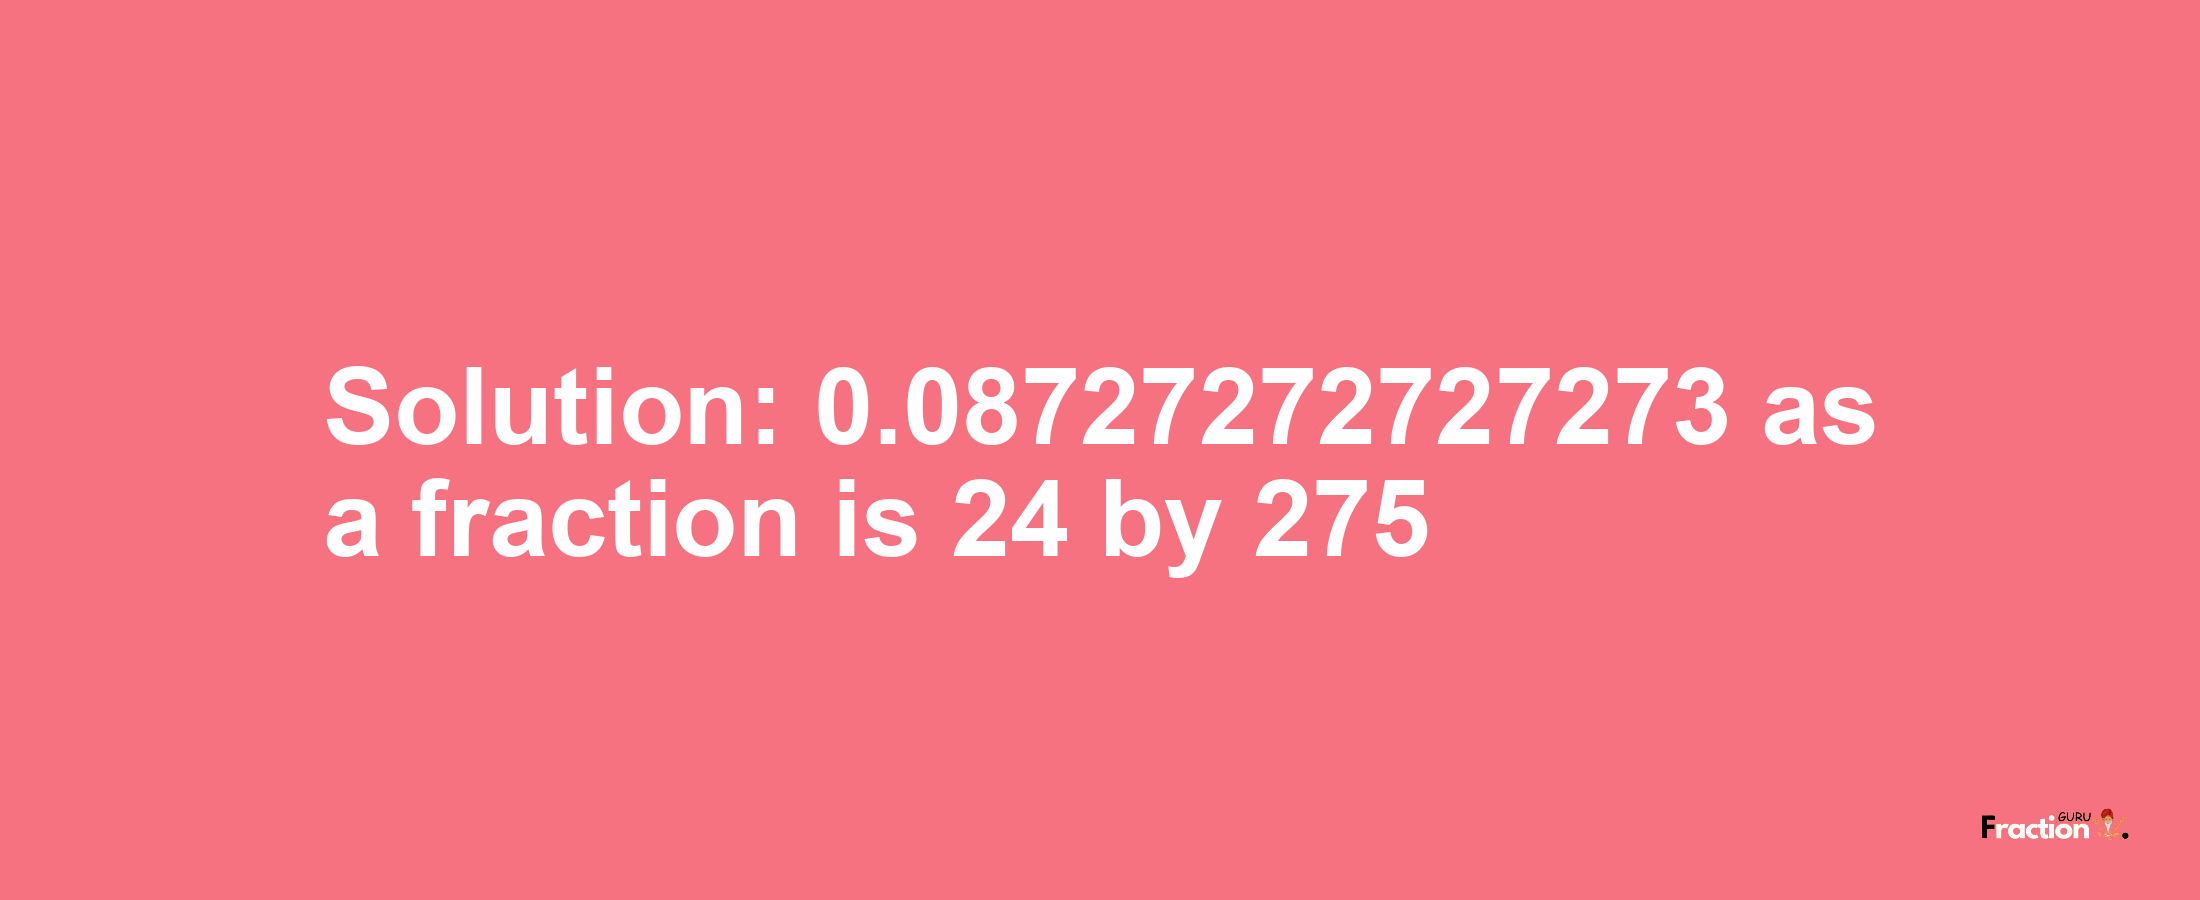 Solution:0.08727272727273 as a fraction is 24/275